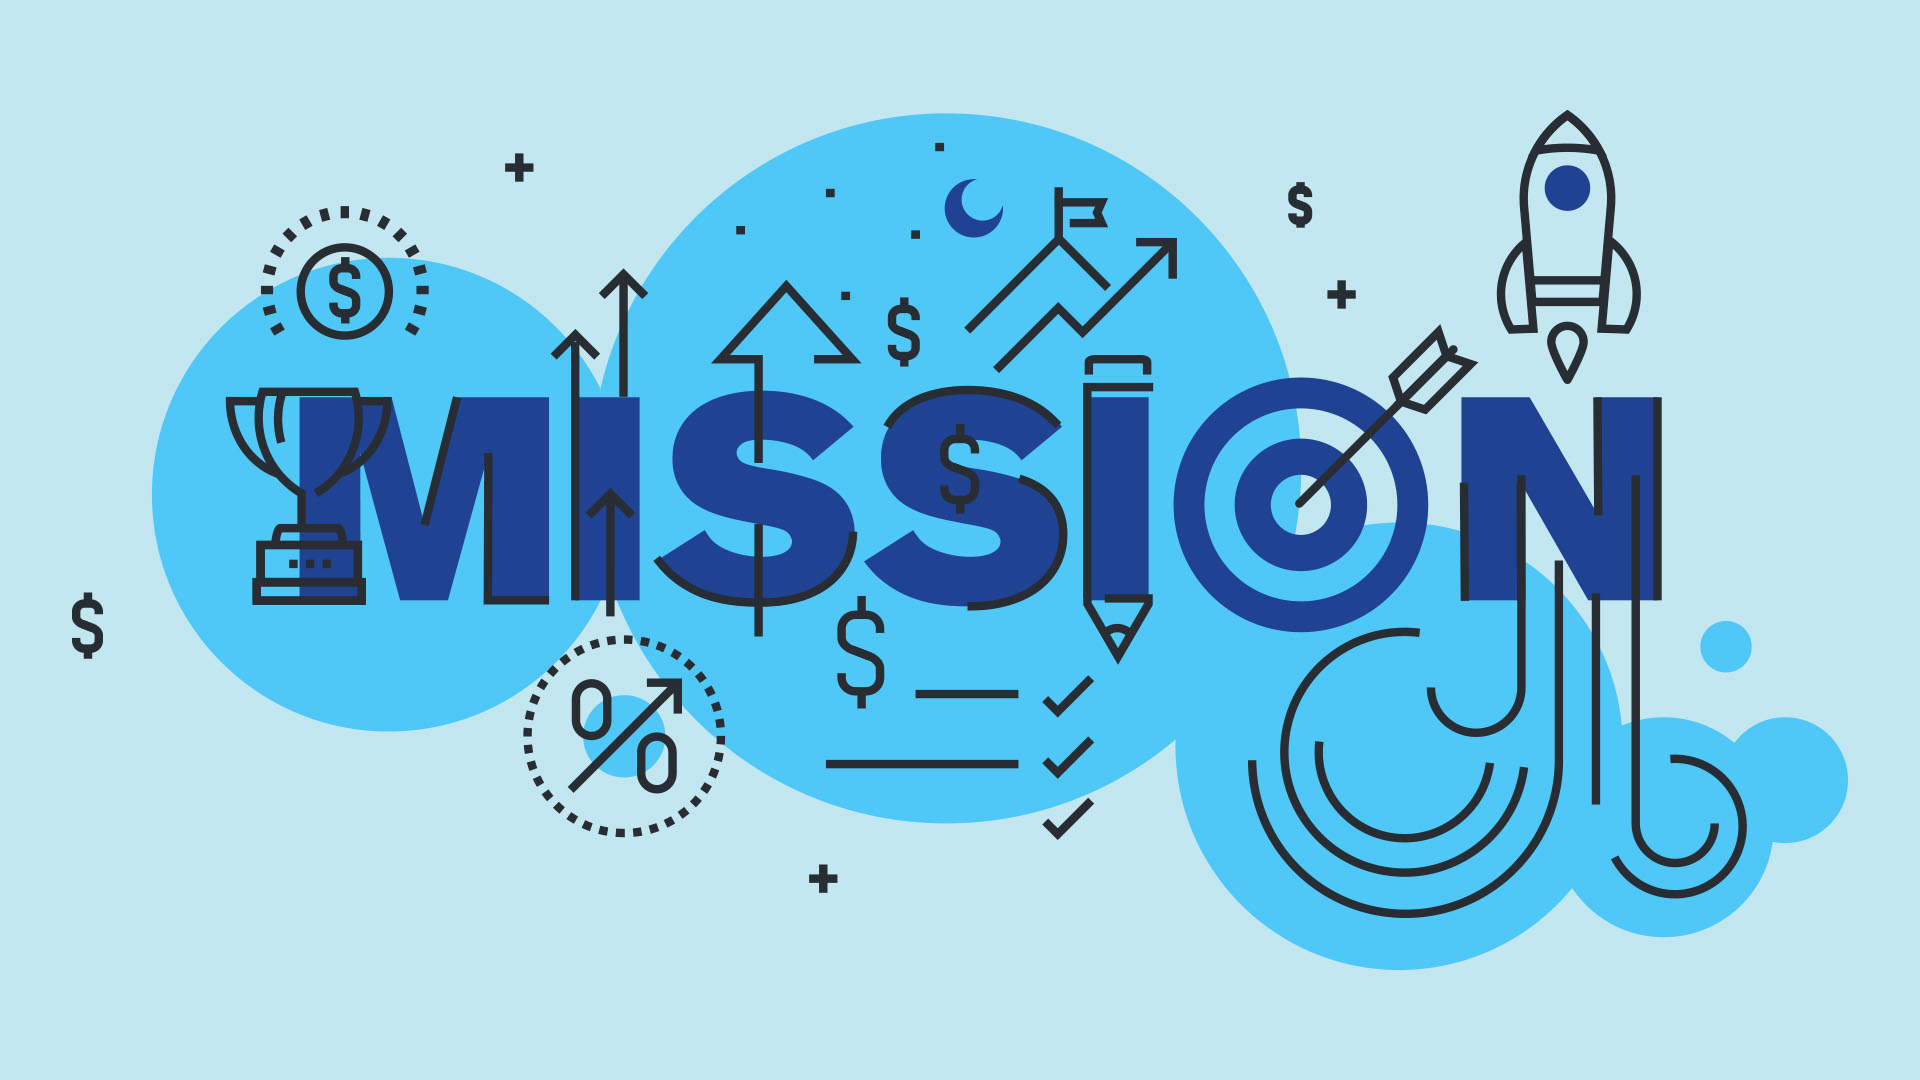 How to Write an Unforgettable Mission Statement (With Examples)